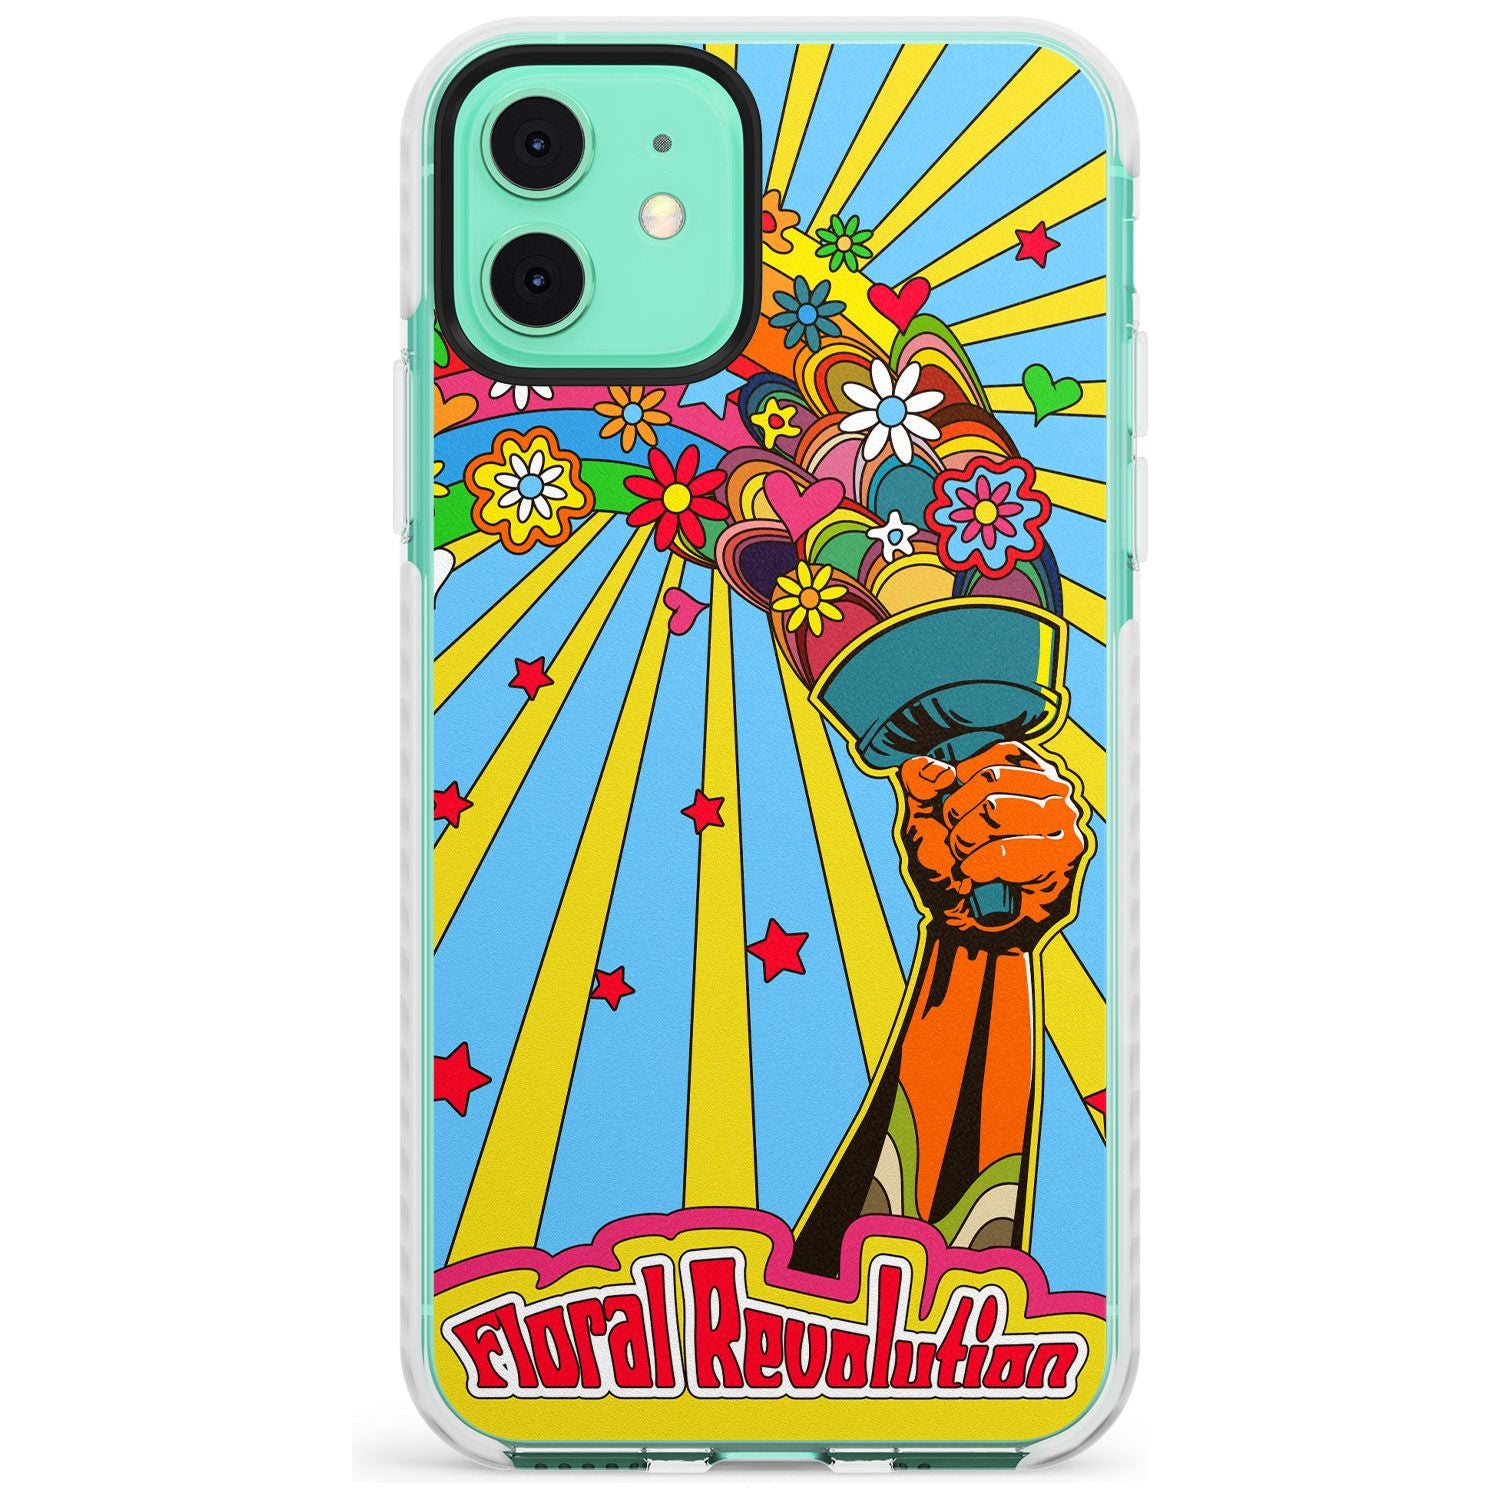 Floral Revolution Slim TPU Phone Case for iPhone 11